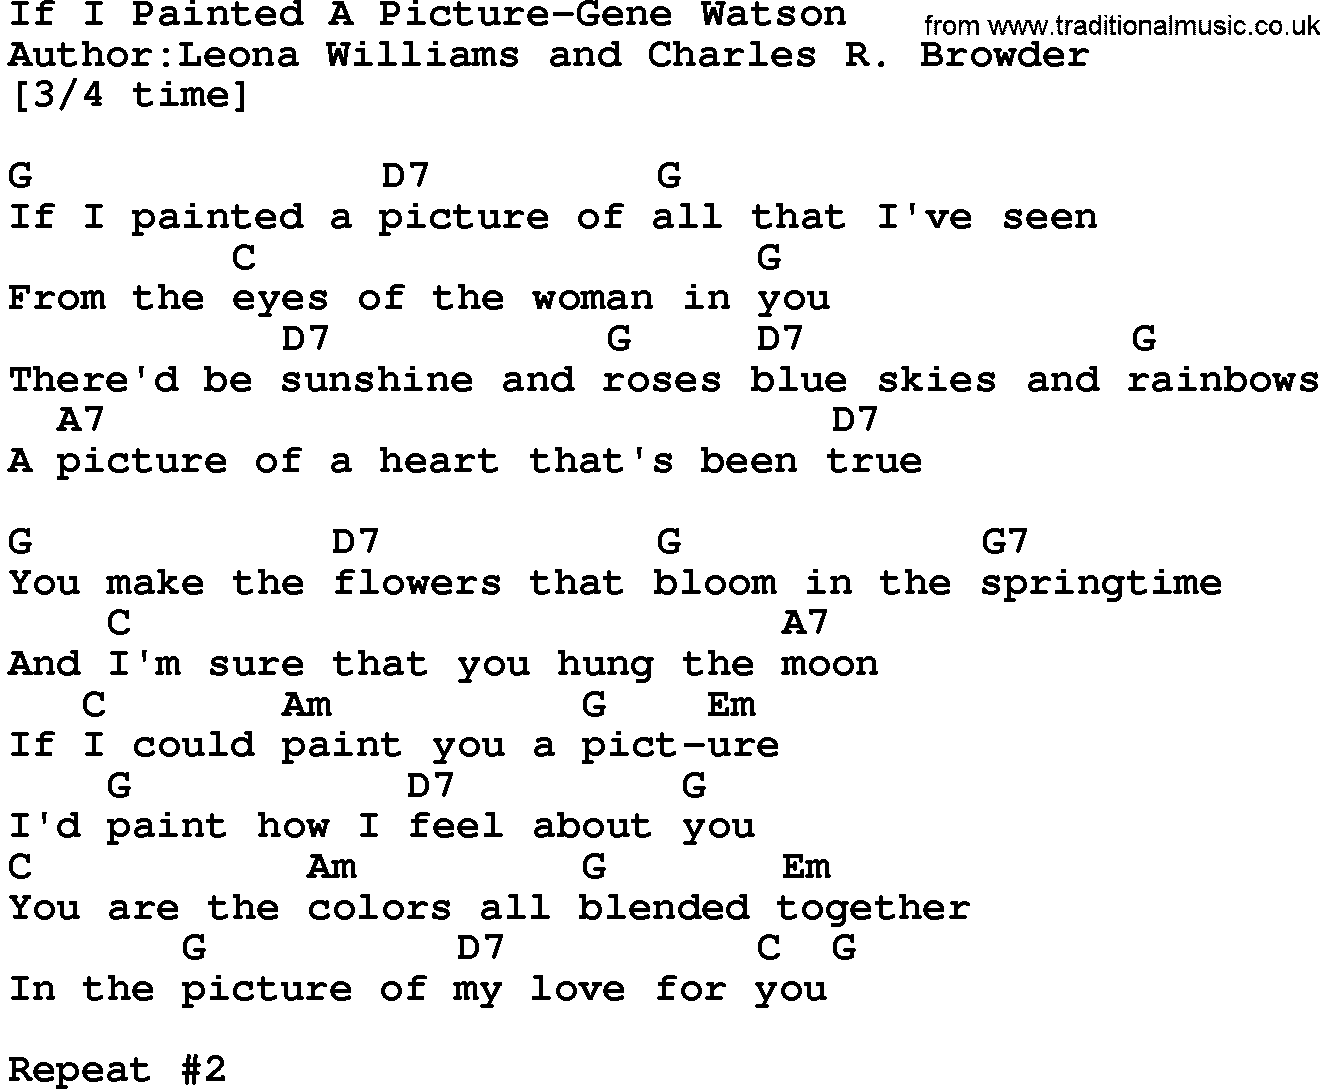 Country music song: If I Painted A Picture-Gene Watson lyrics and chords